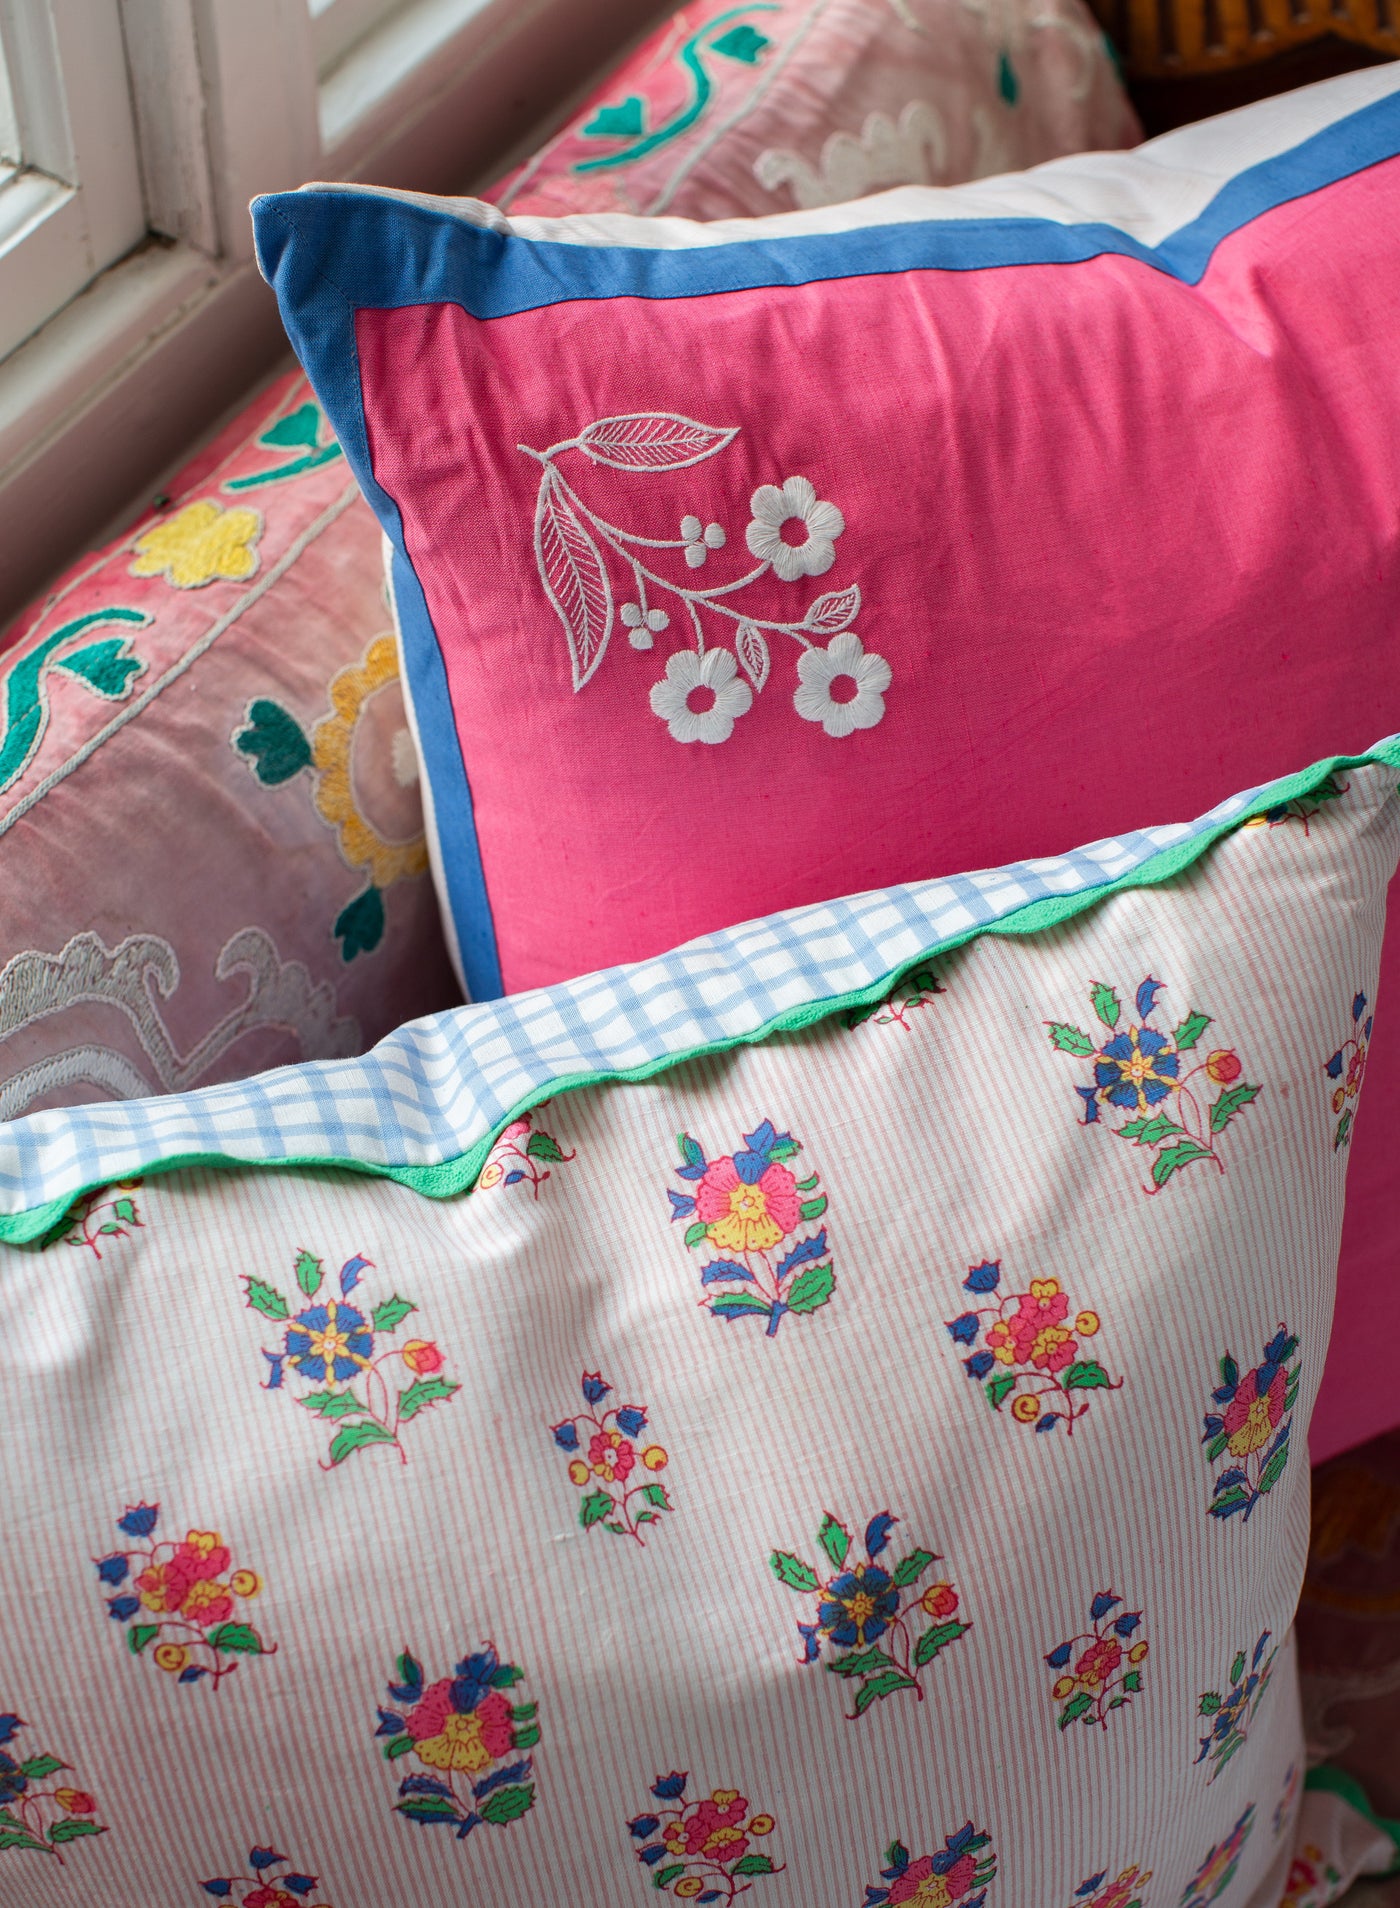 Hester Embroidered Floral Cushion - Pink & Blue